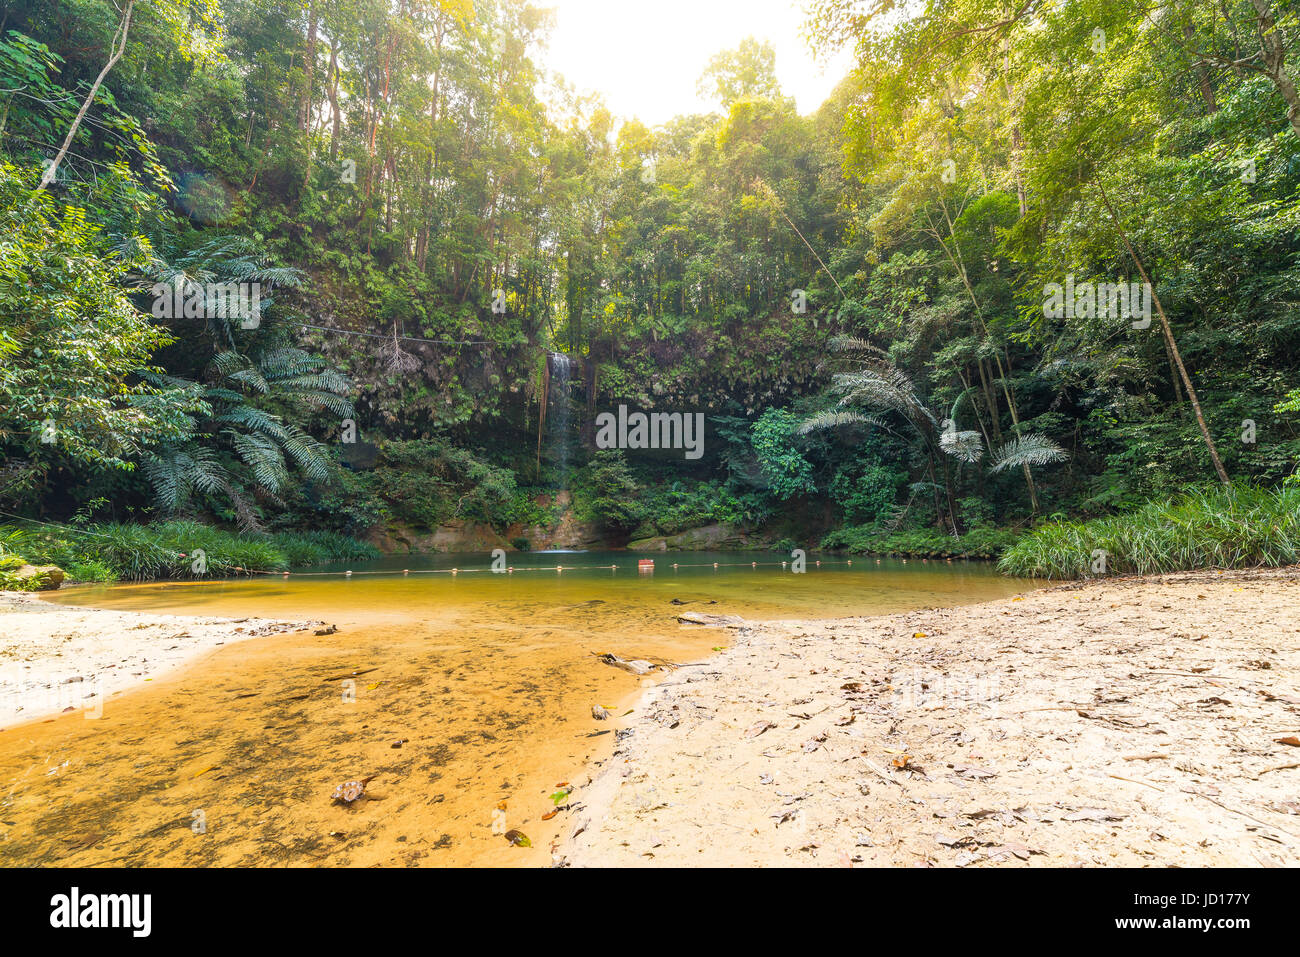 Dreamy multicolored natural pool hidden in the dense and umid rainforest of Lambir Hills National Park, Borneo, Malaysia. Concept of discovery and exp Stock Photo